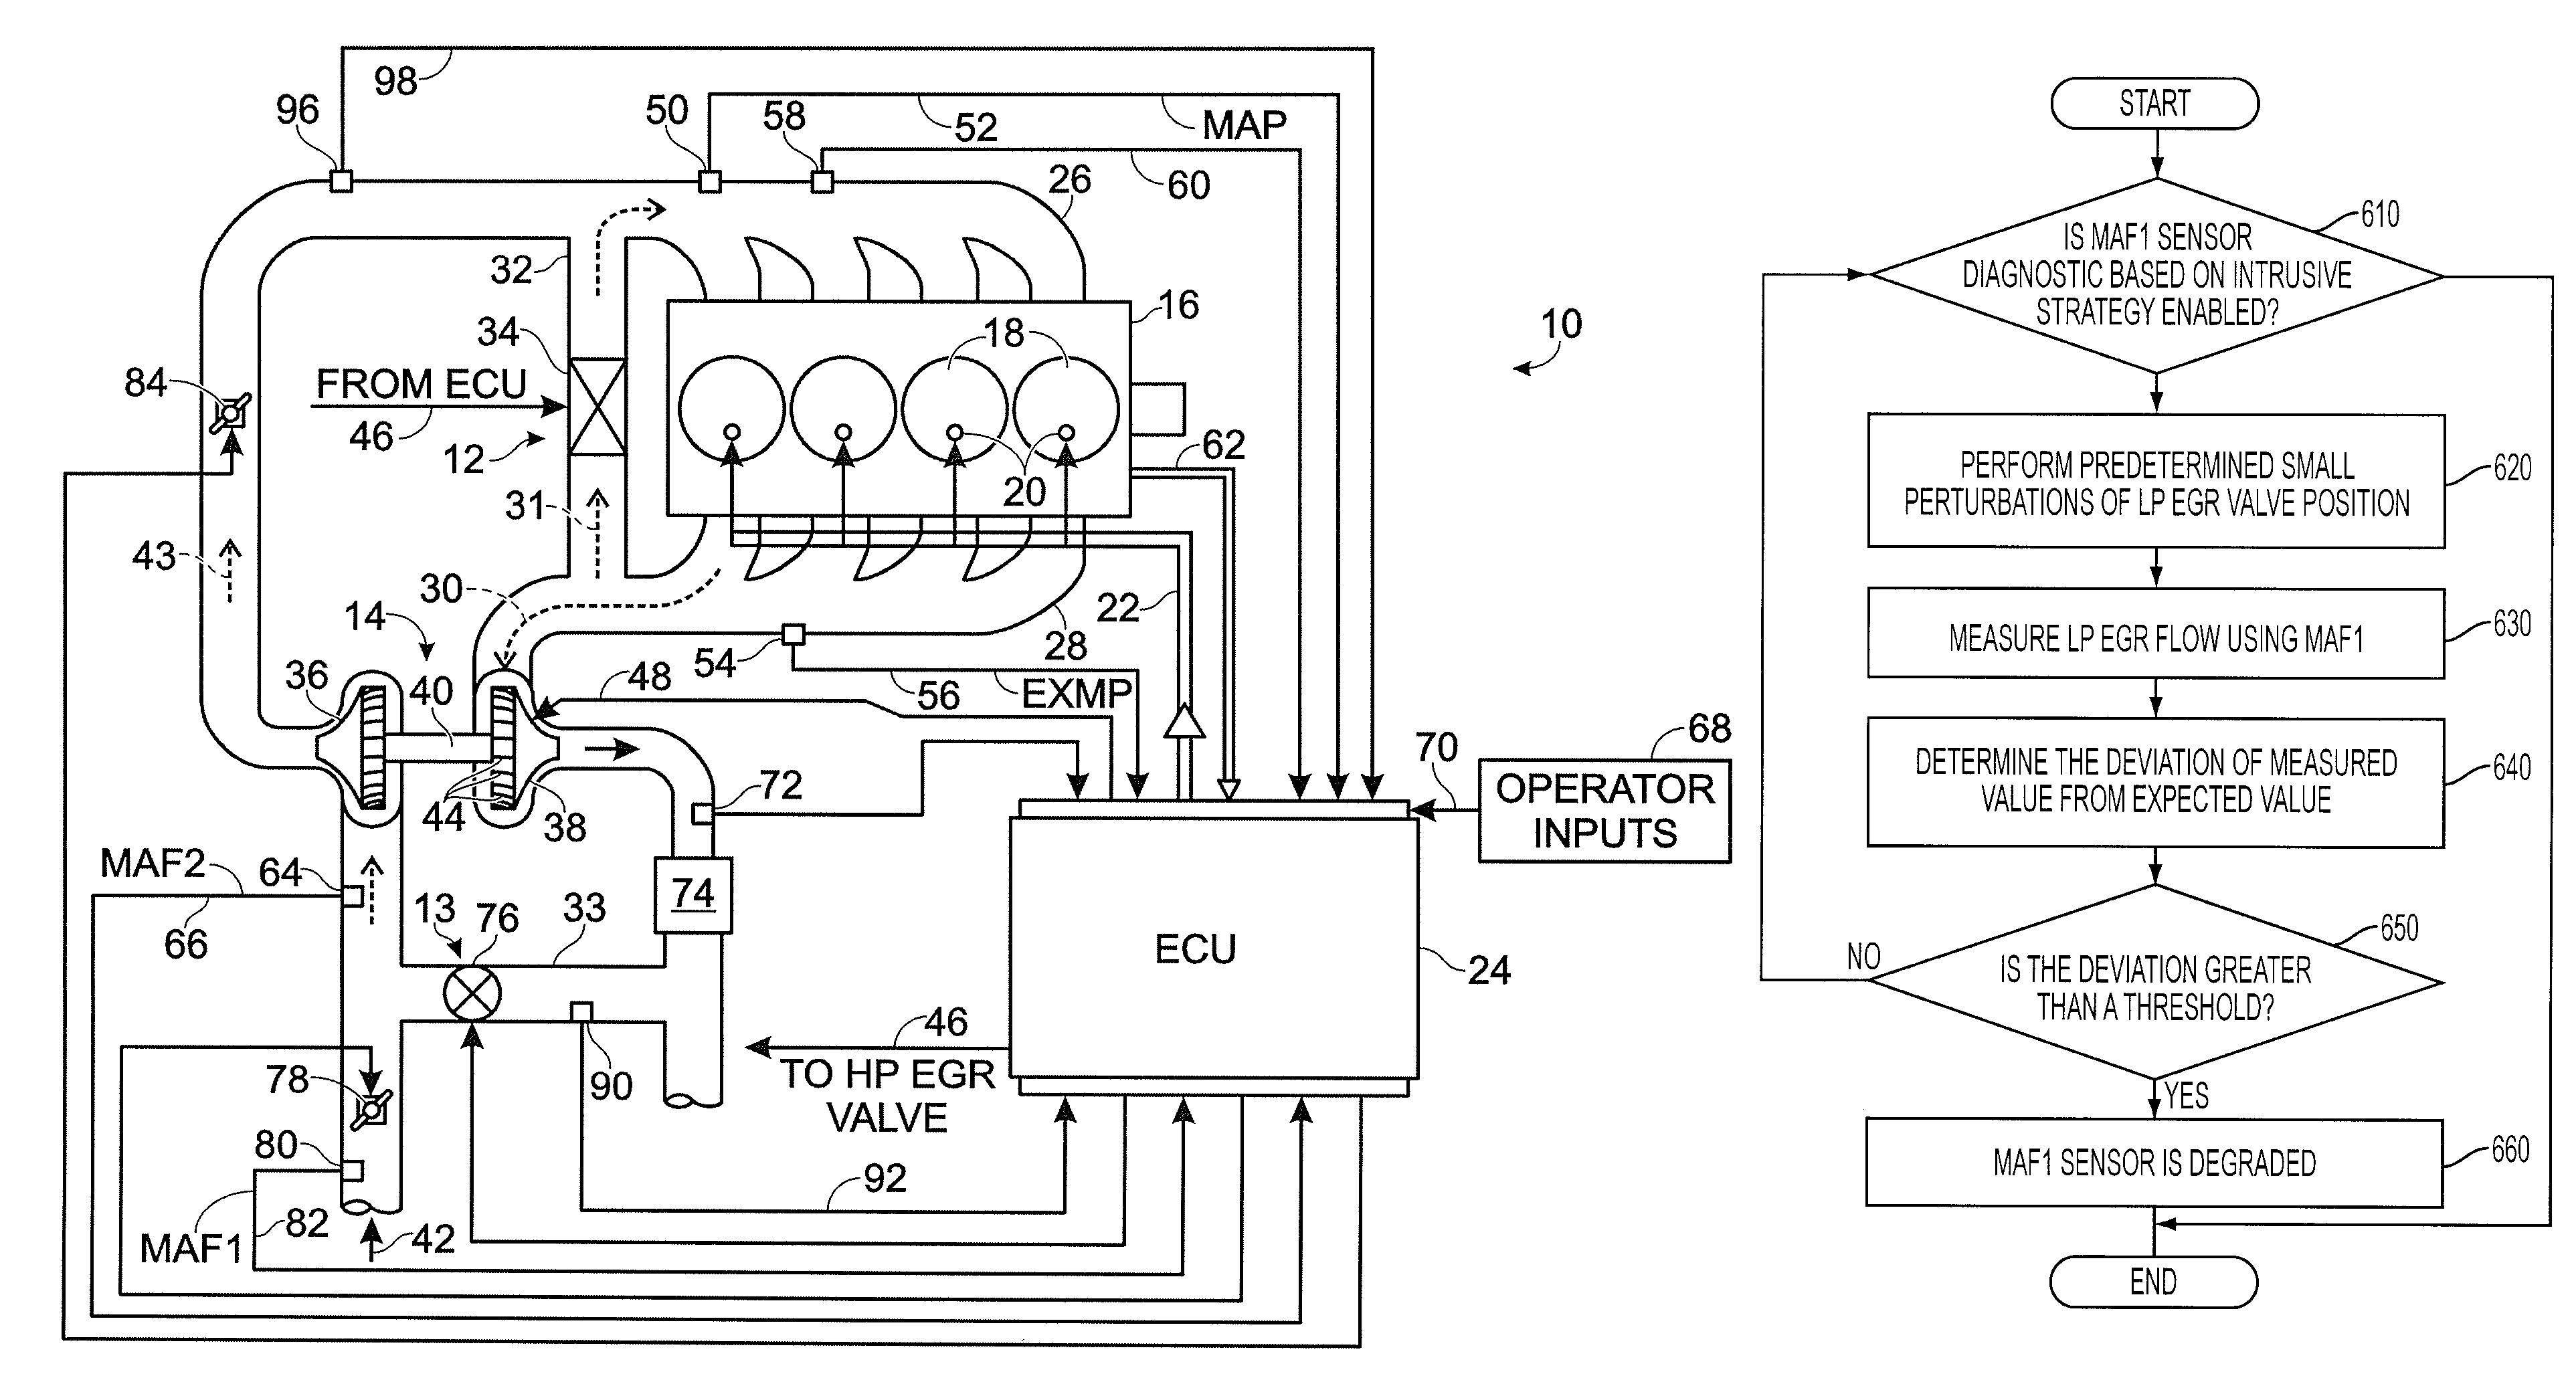 System and method for diagnostic of low pressure exhaust gas recirculation system and adapting of measurement devices